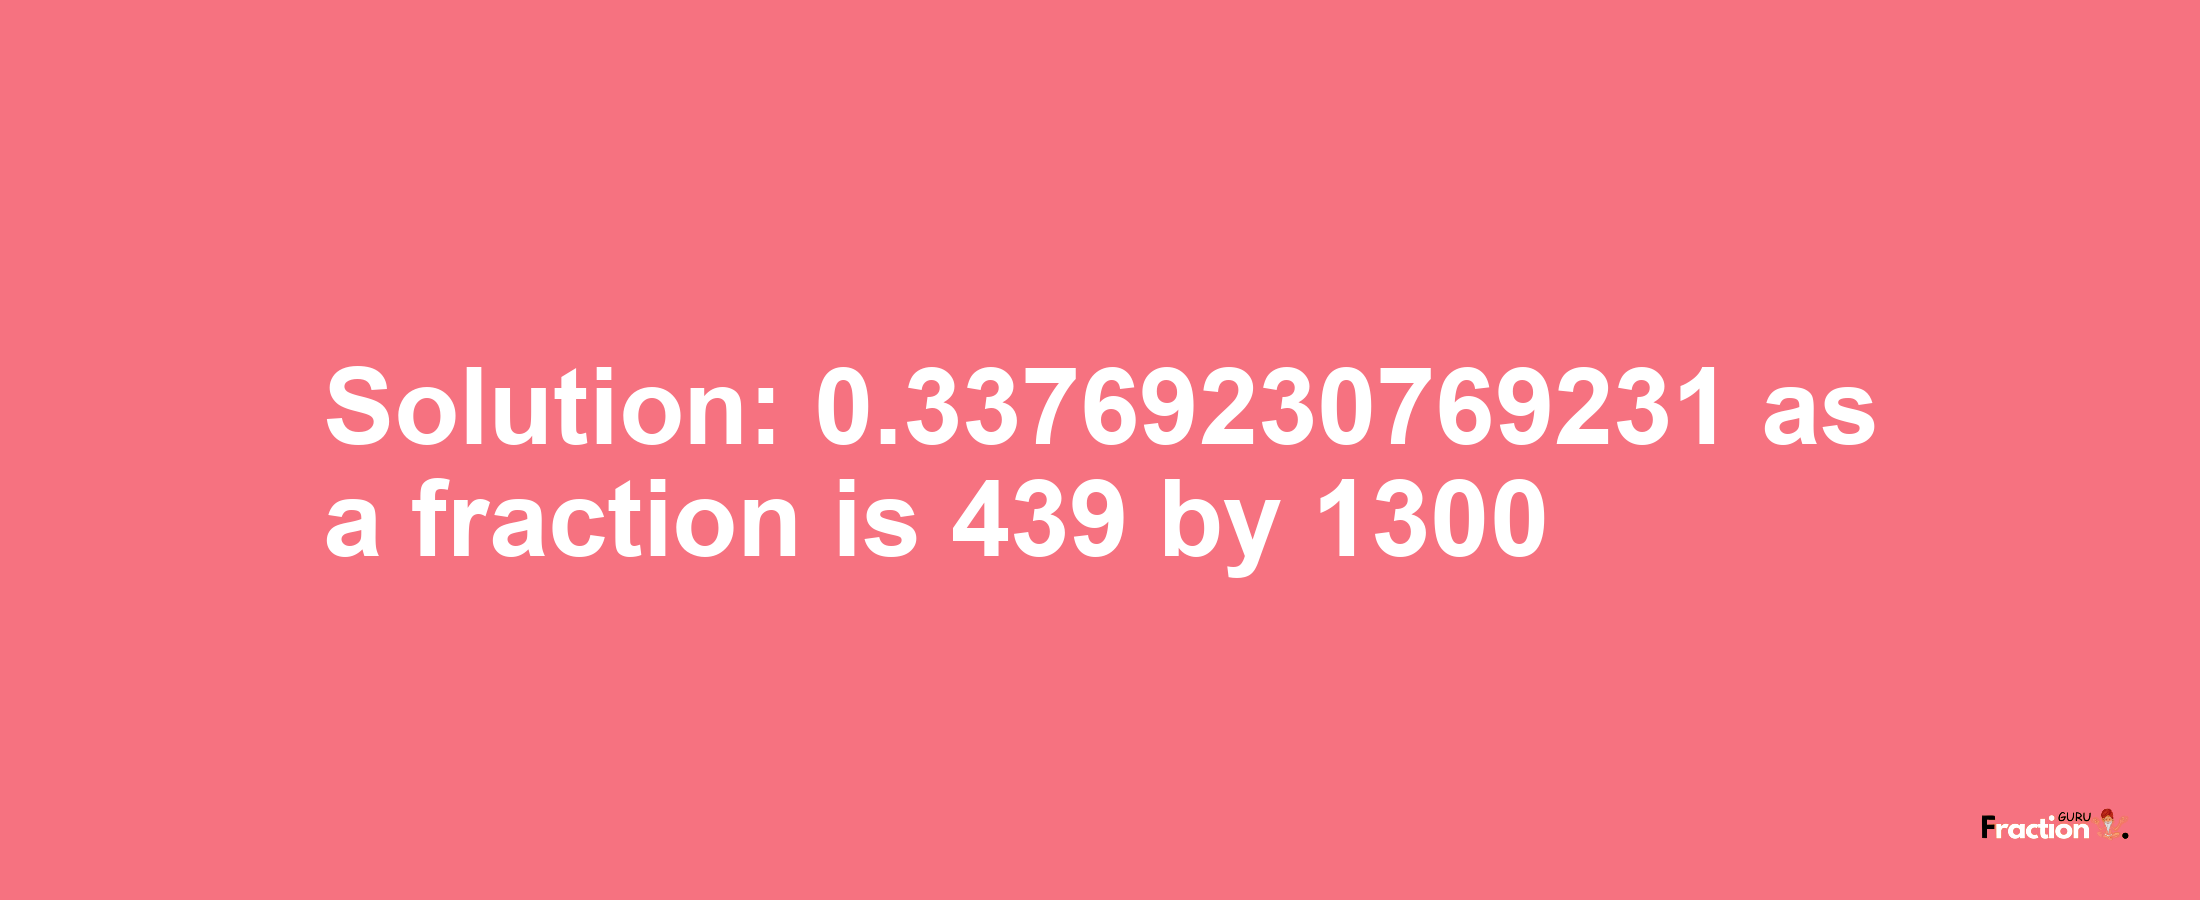 Solution:0.33769230769231 as a fraction is 439/1300